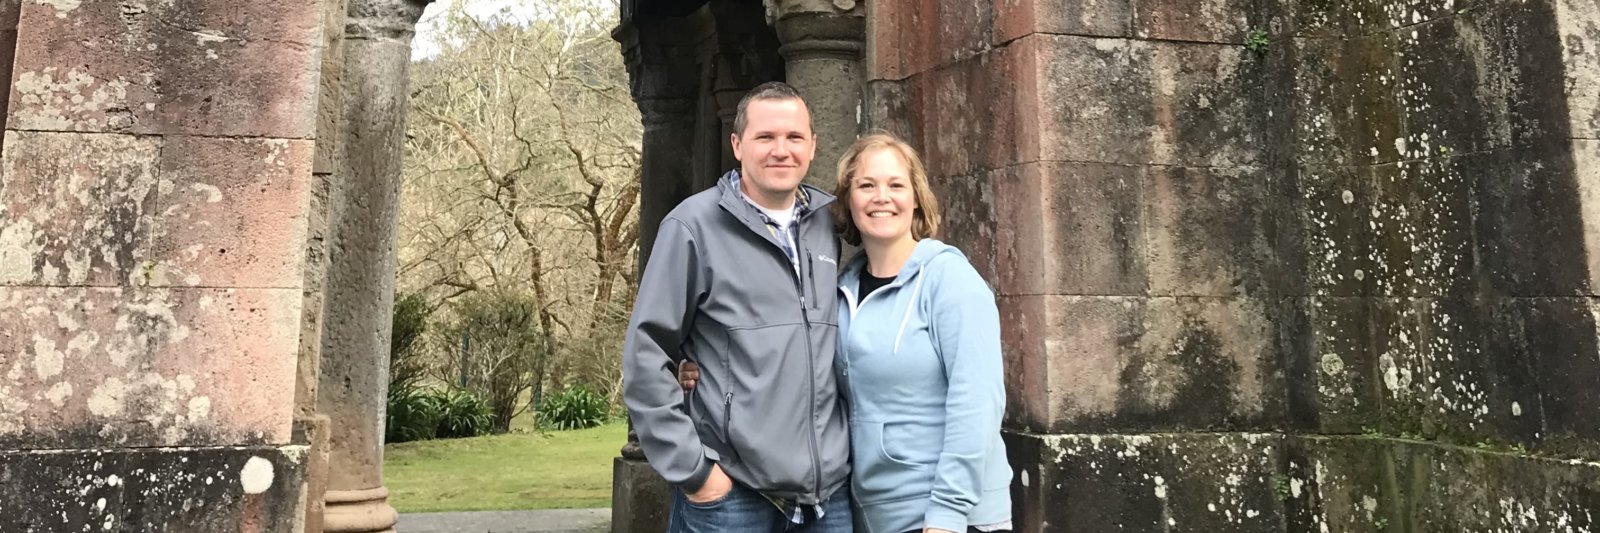 couple in front of old building